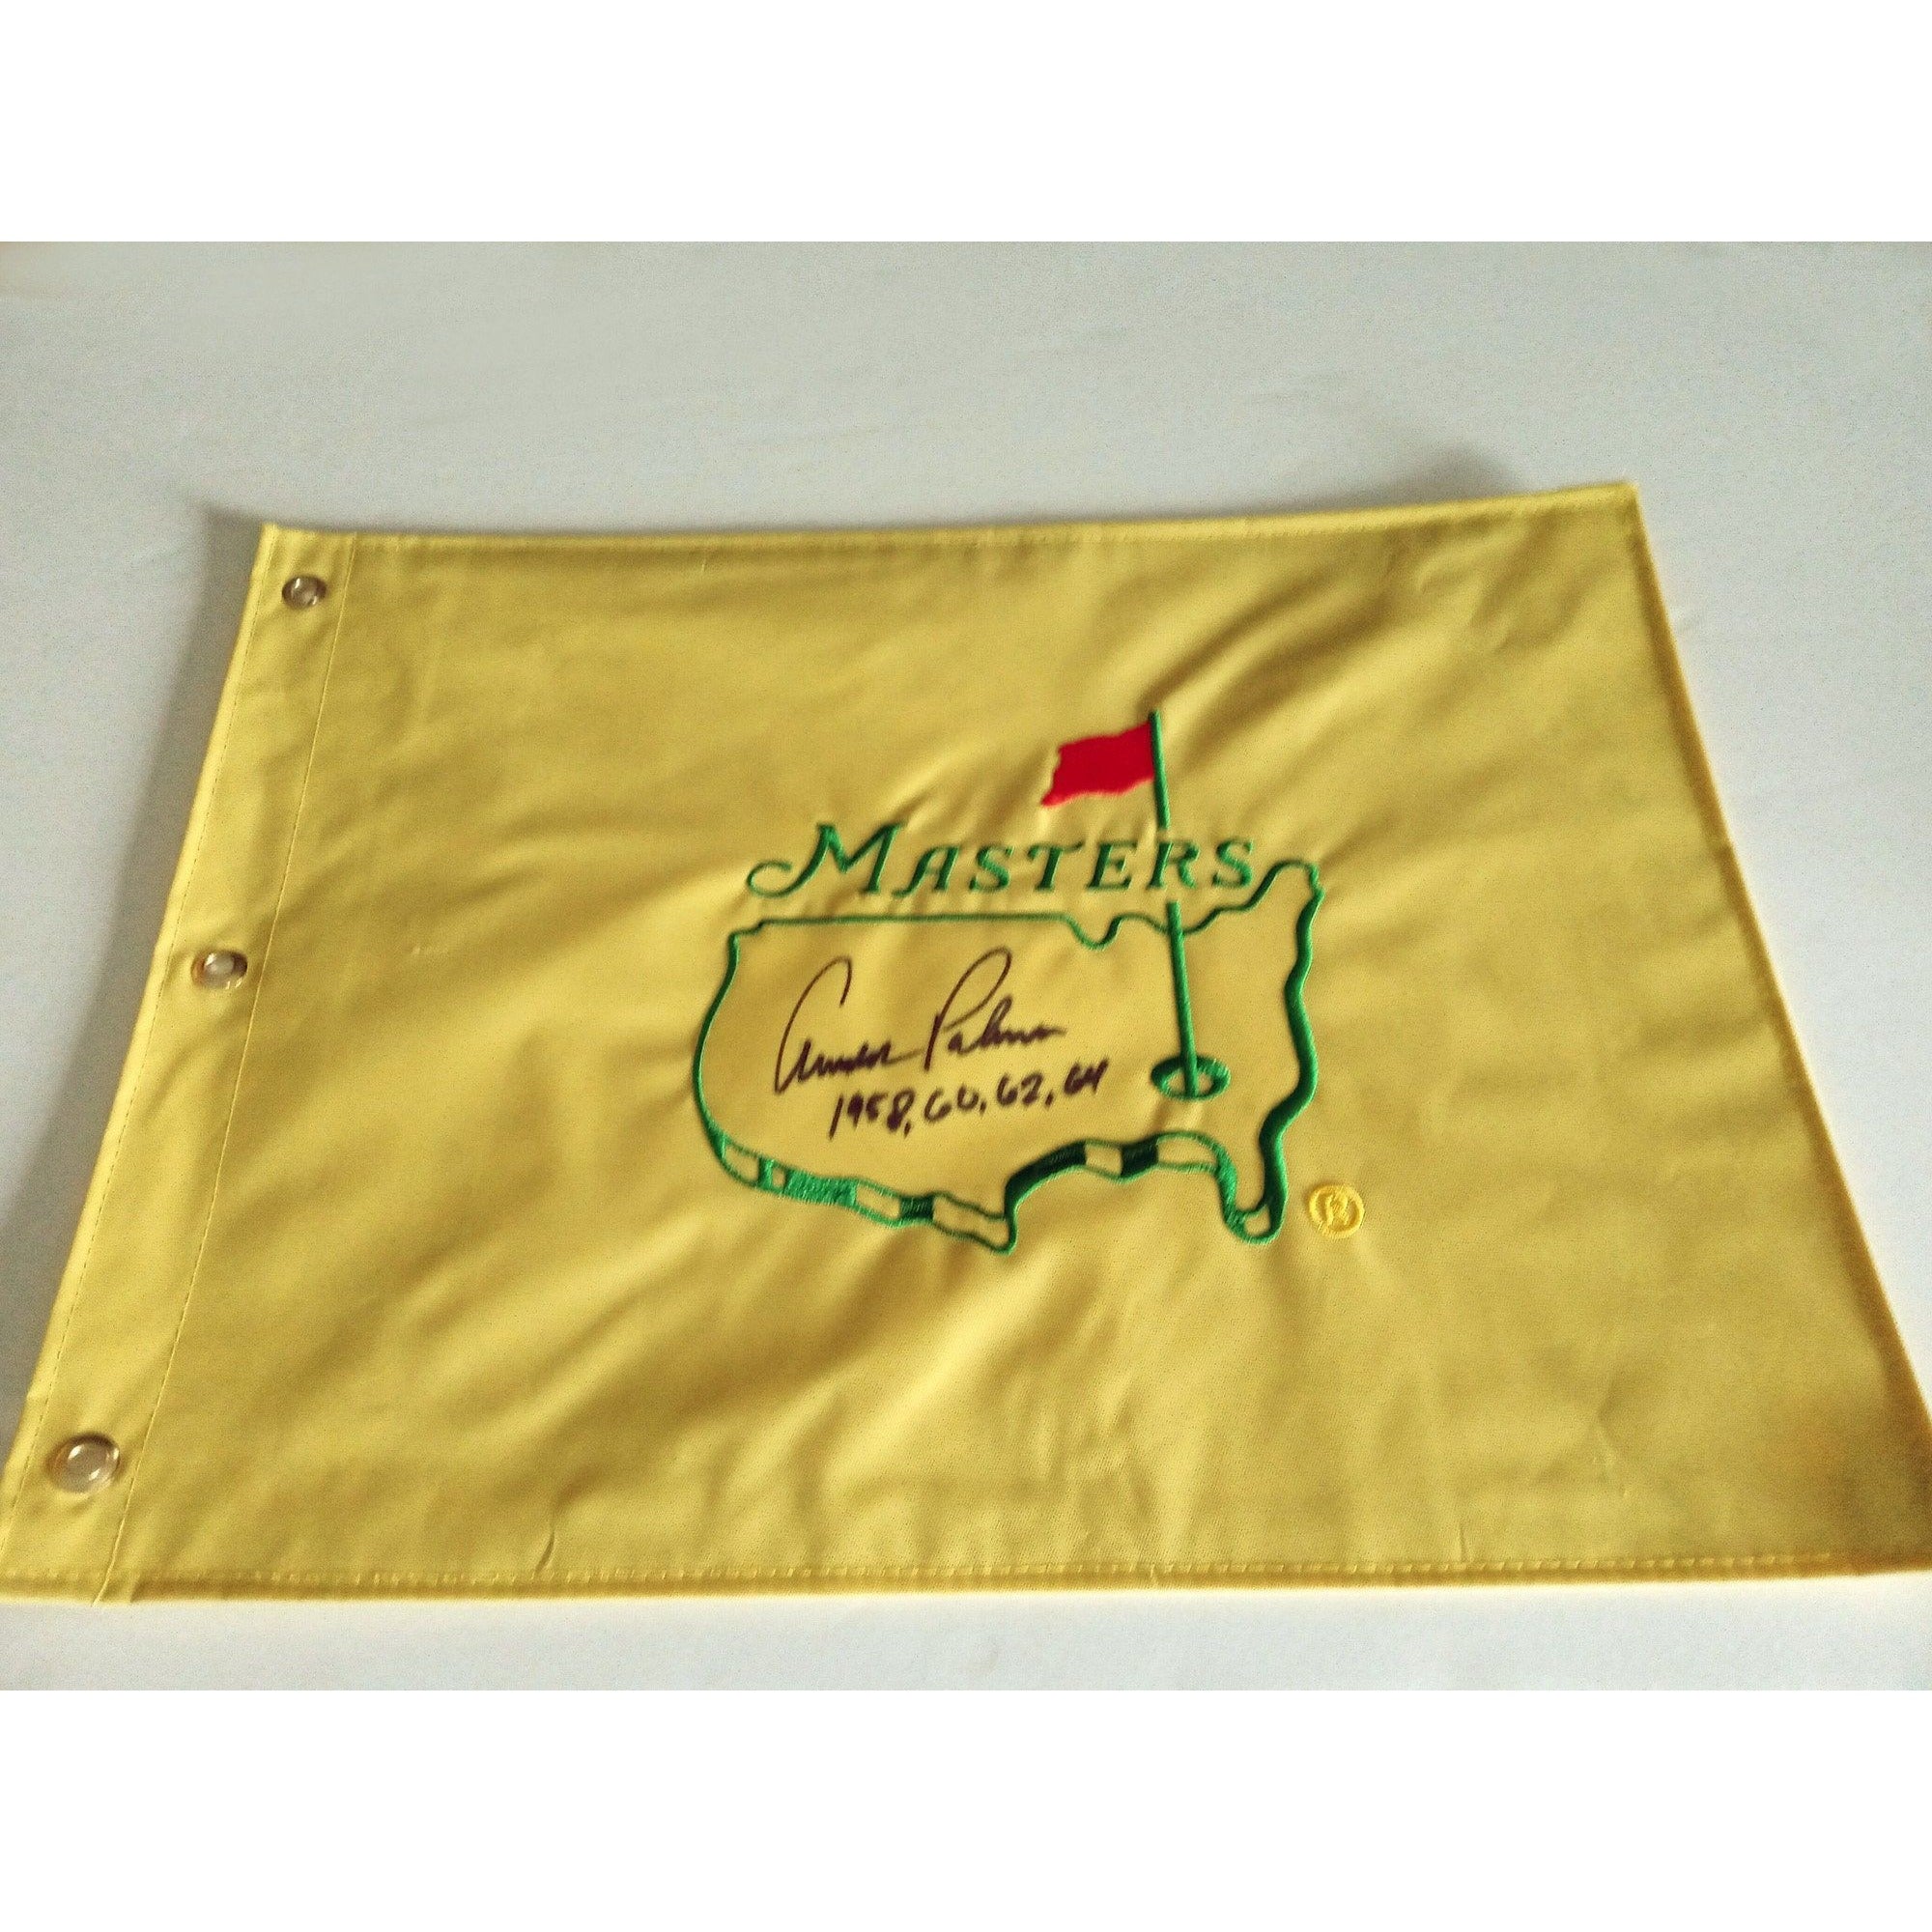 Arnold Palmer signed and inscribed Masters Golf flag with proof